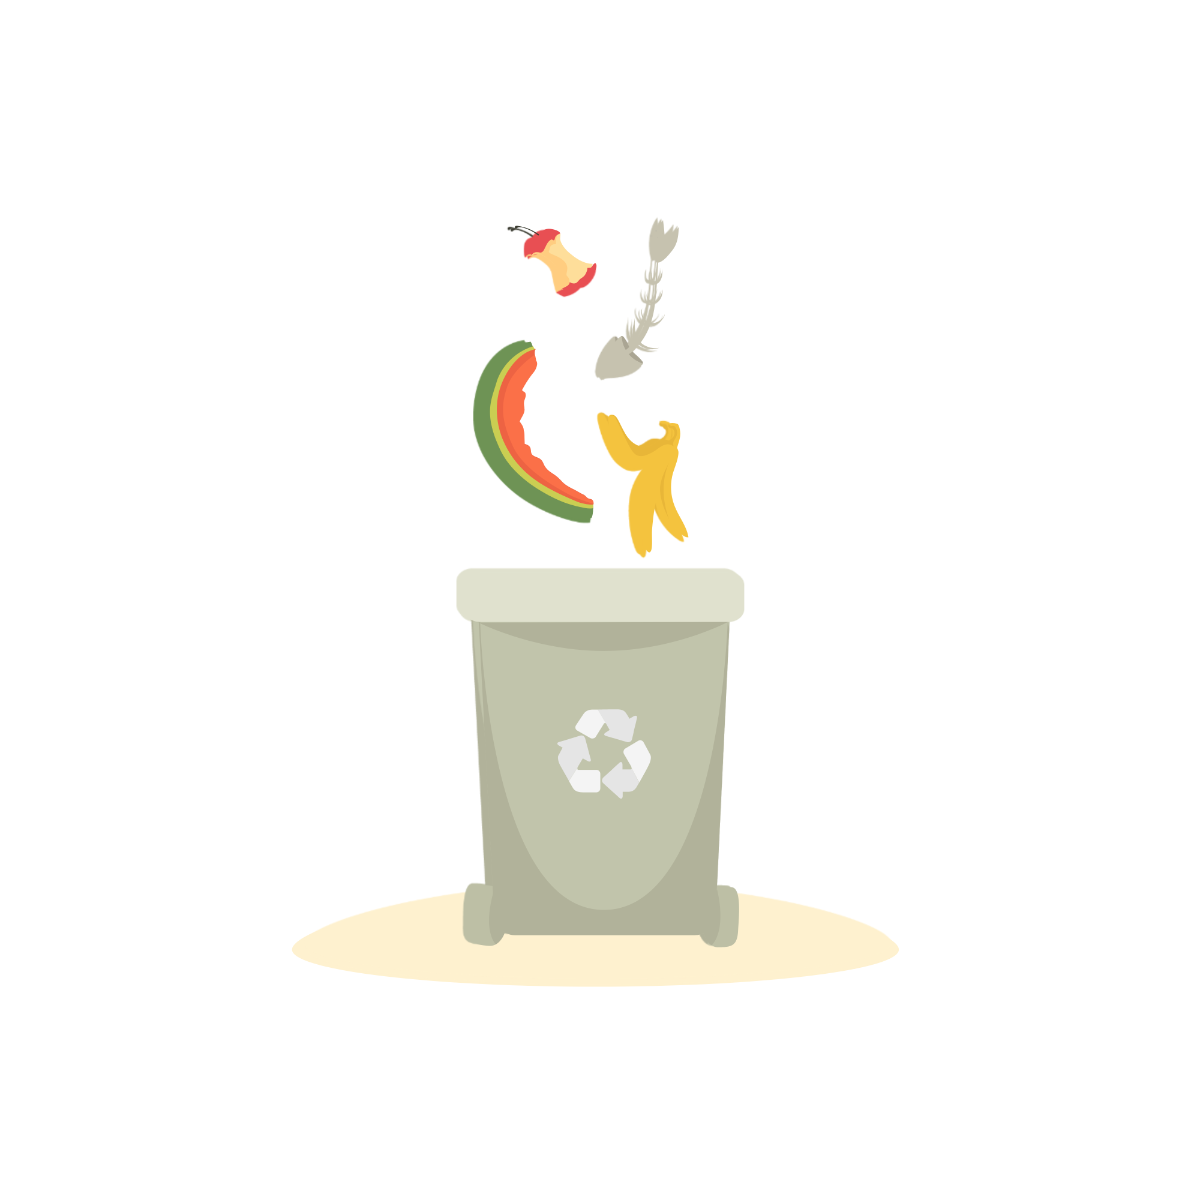 Free Recycle Waste Vector Template